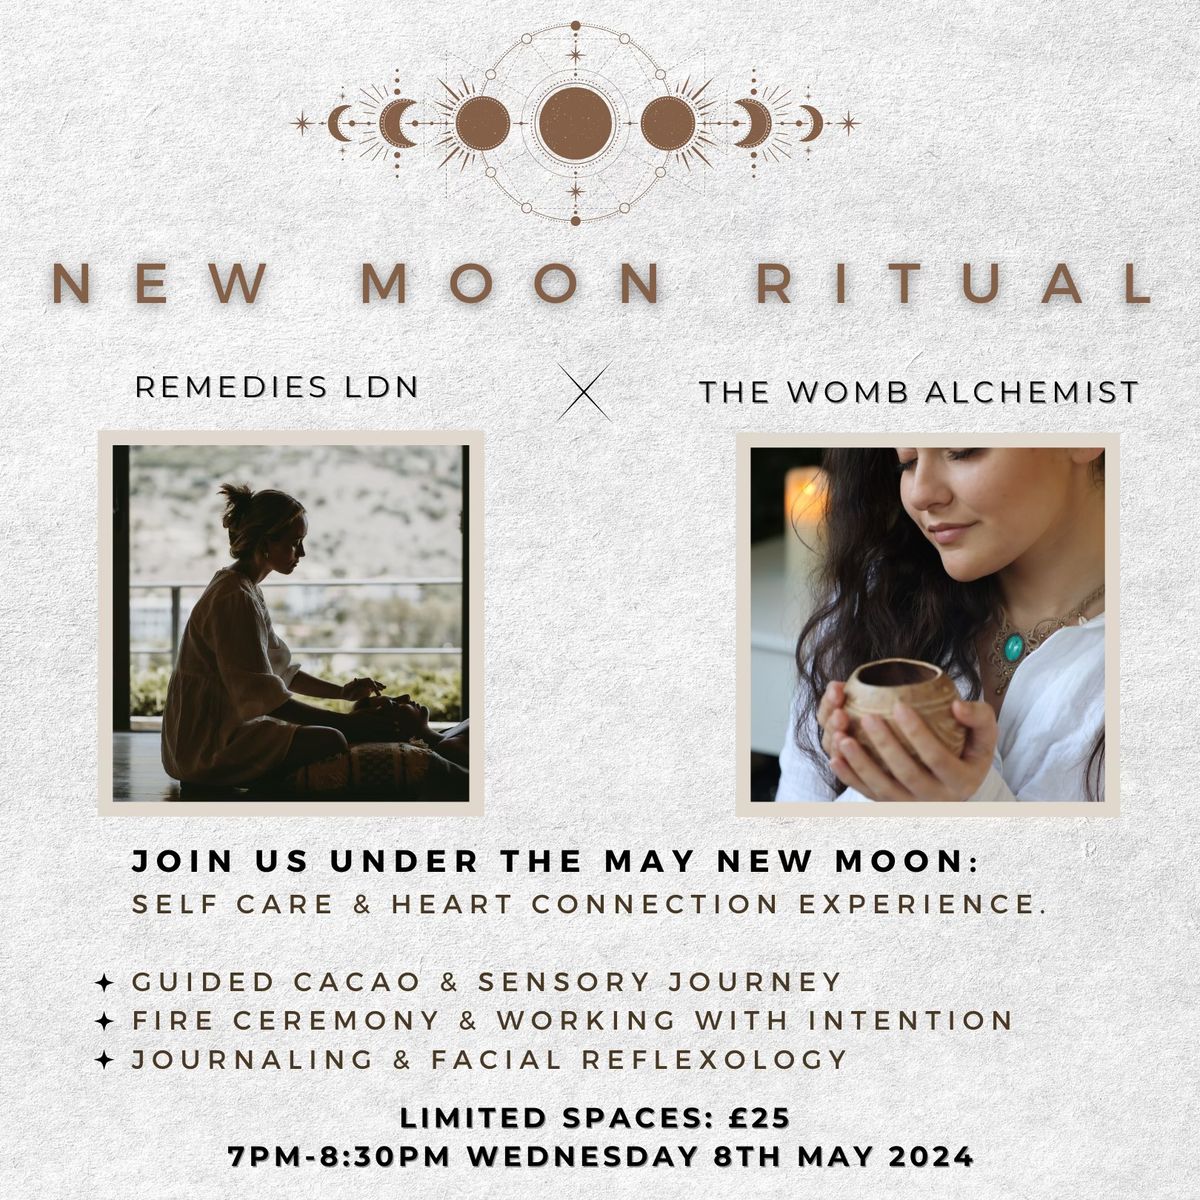 New Moon Cacao, Fire & Self Care Ceremony 